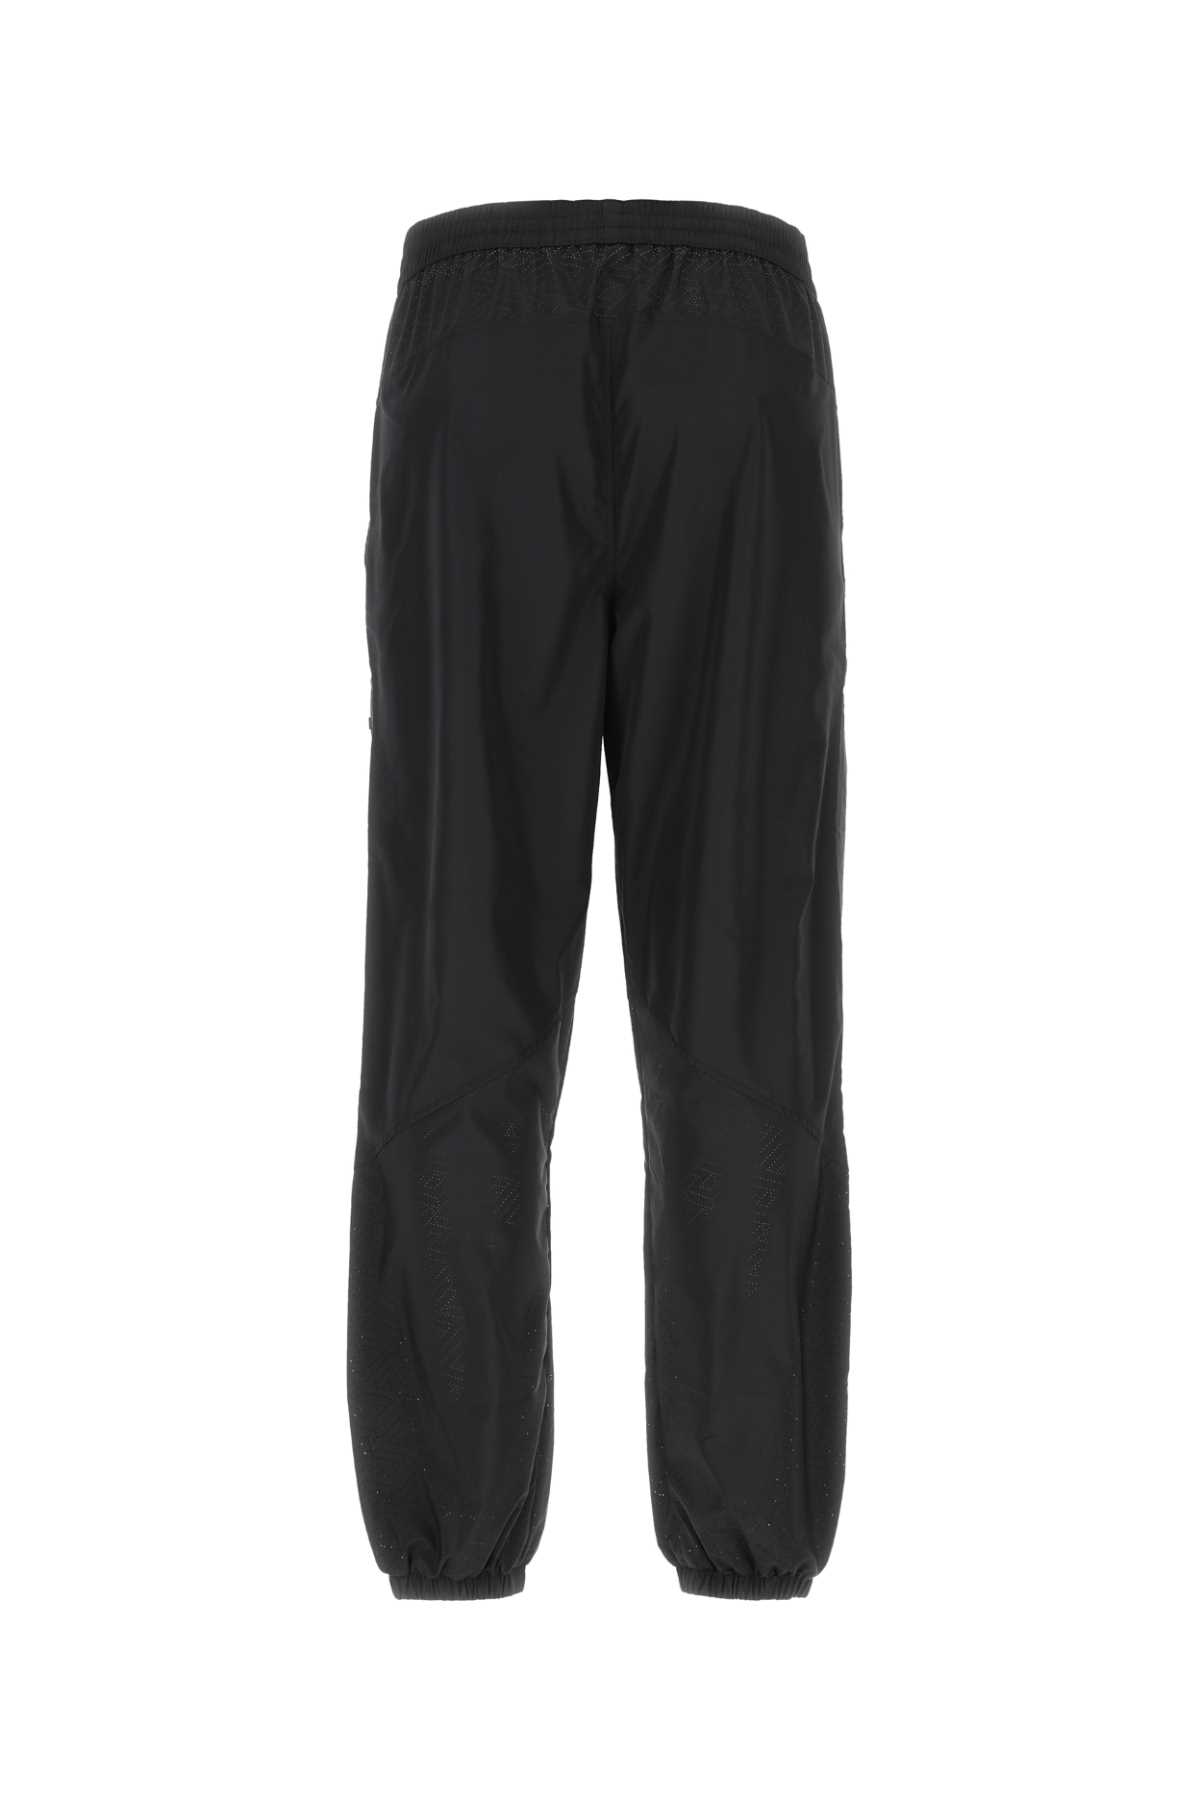 VERSACE BLACK POLYESTER JOGGERS